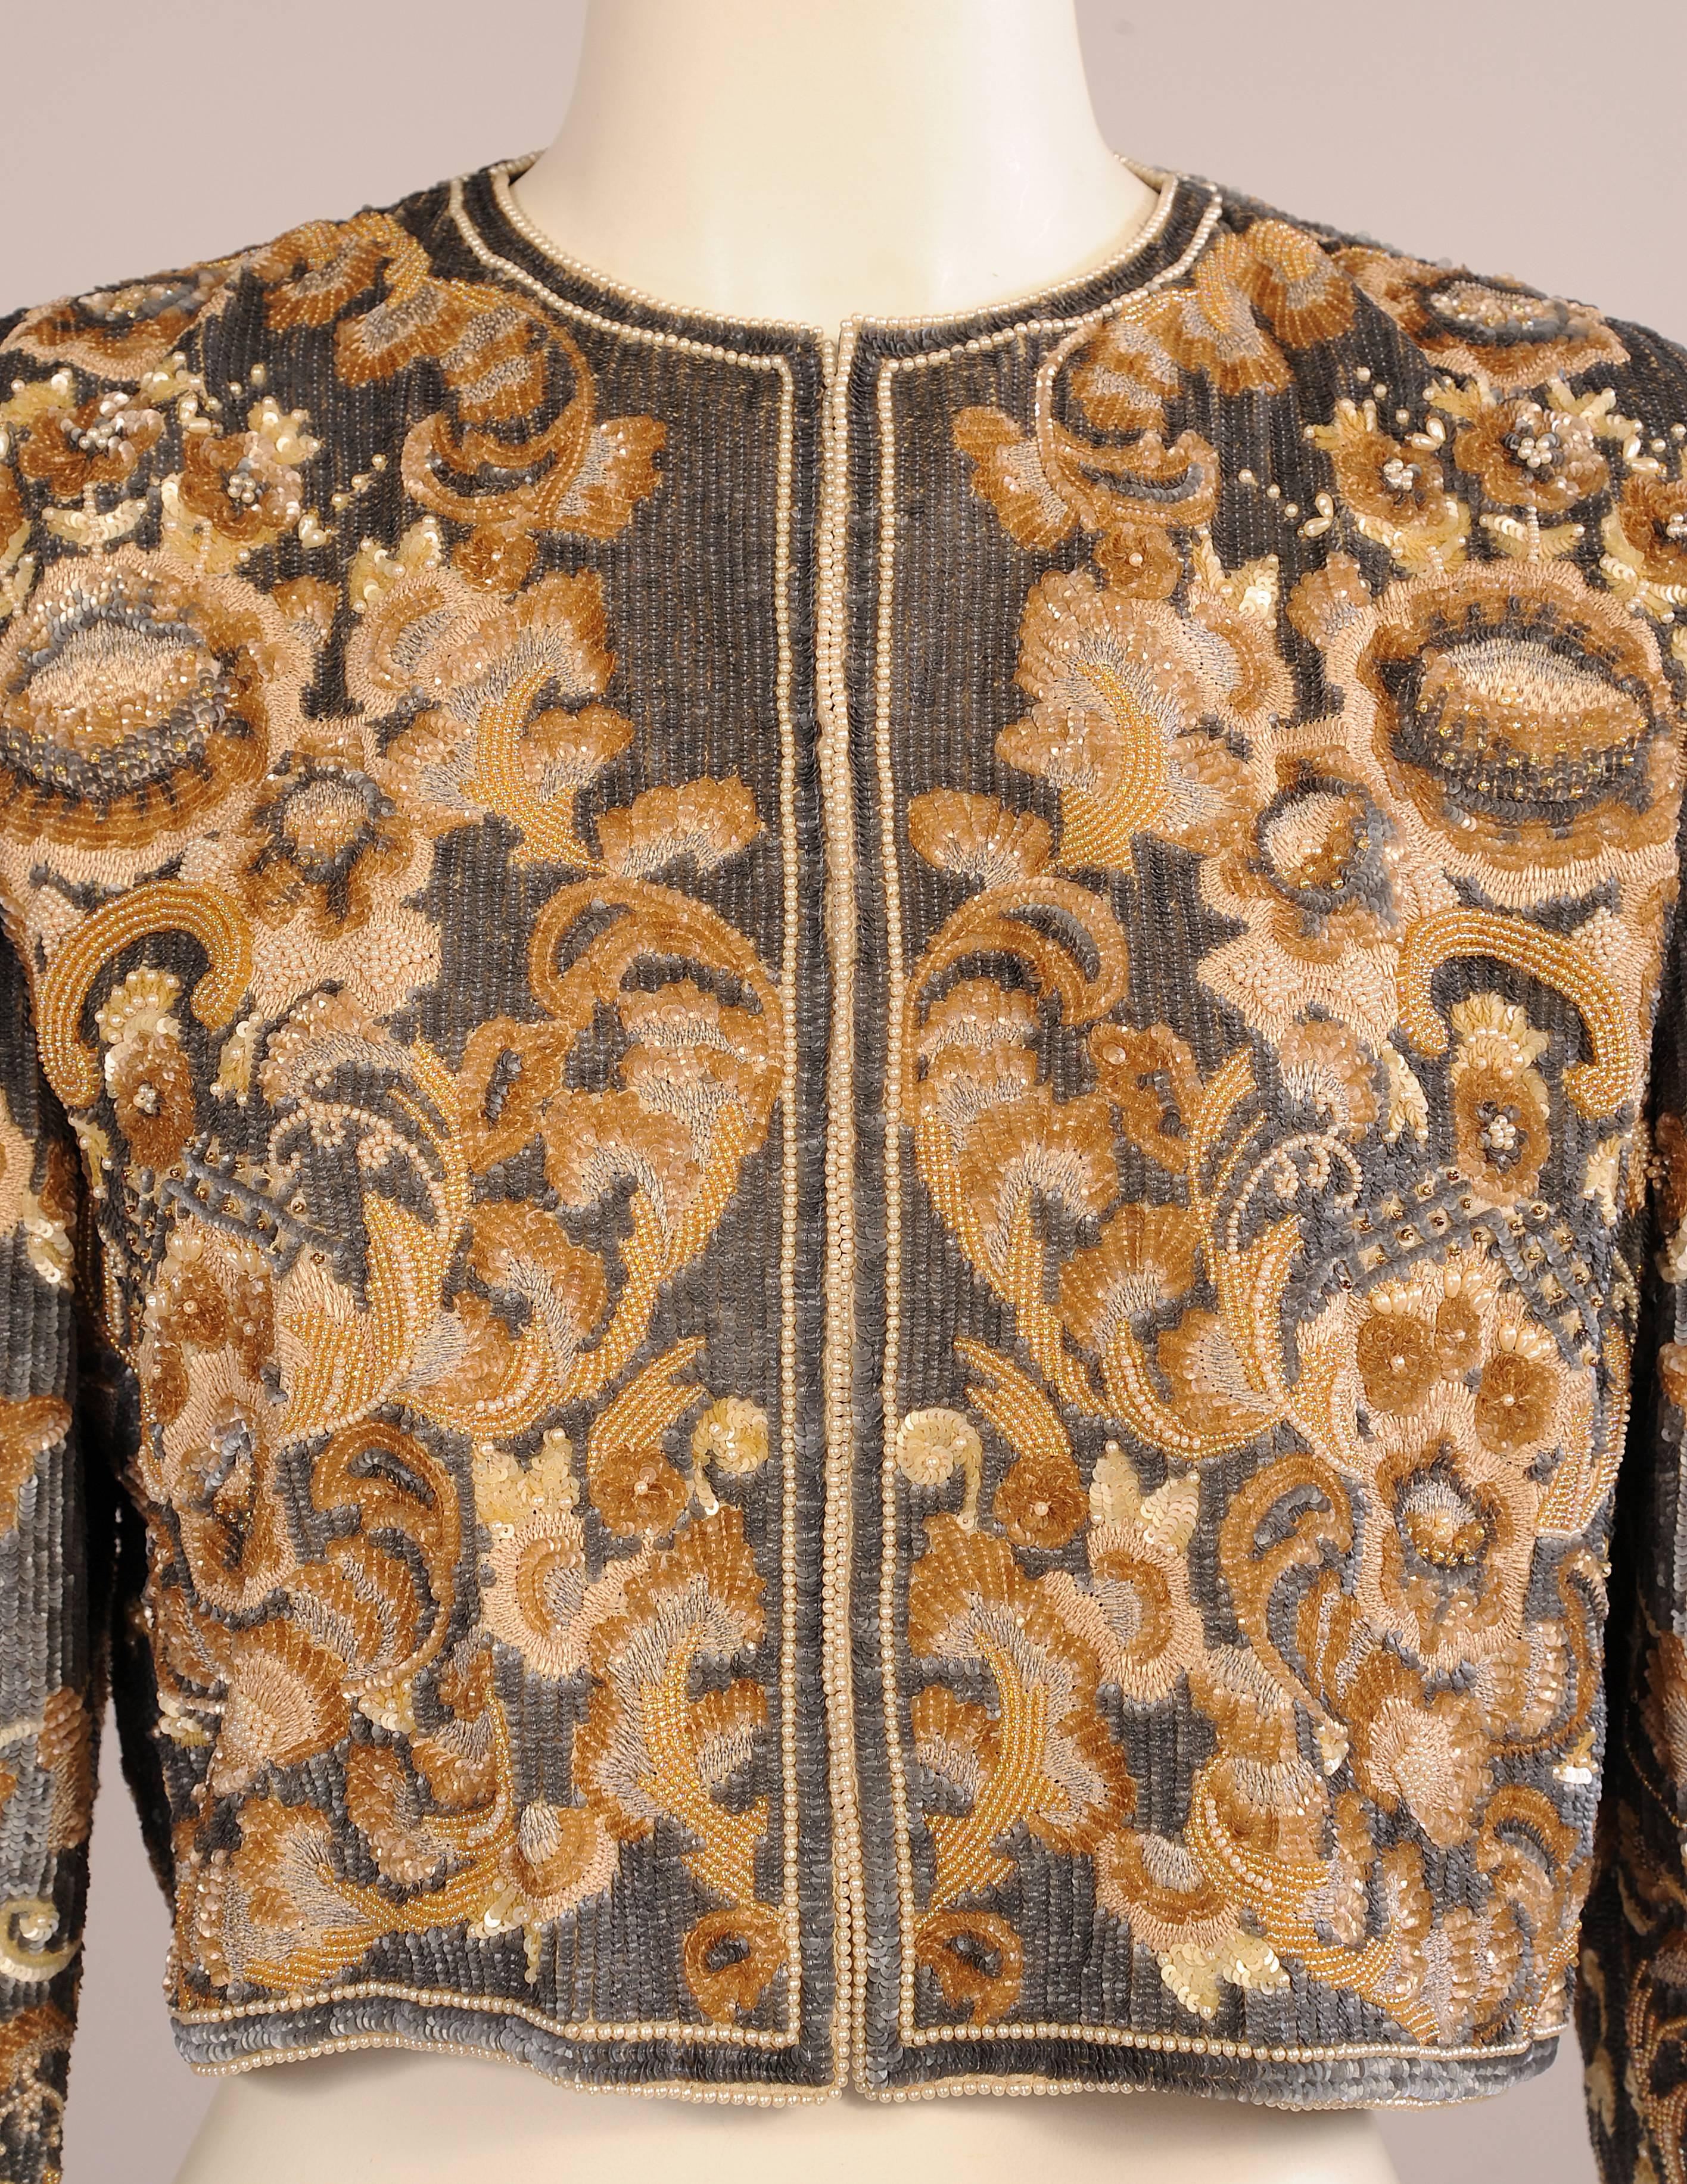 Completely covered in beads, sequins, pearls and embroidery this stunning evening jacket has a floral design worked in shades of cream, beige, camel and charcoal grey.  Great with an evening dress it would also be fabulous with grey flannel or camel